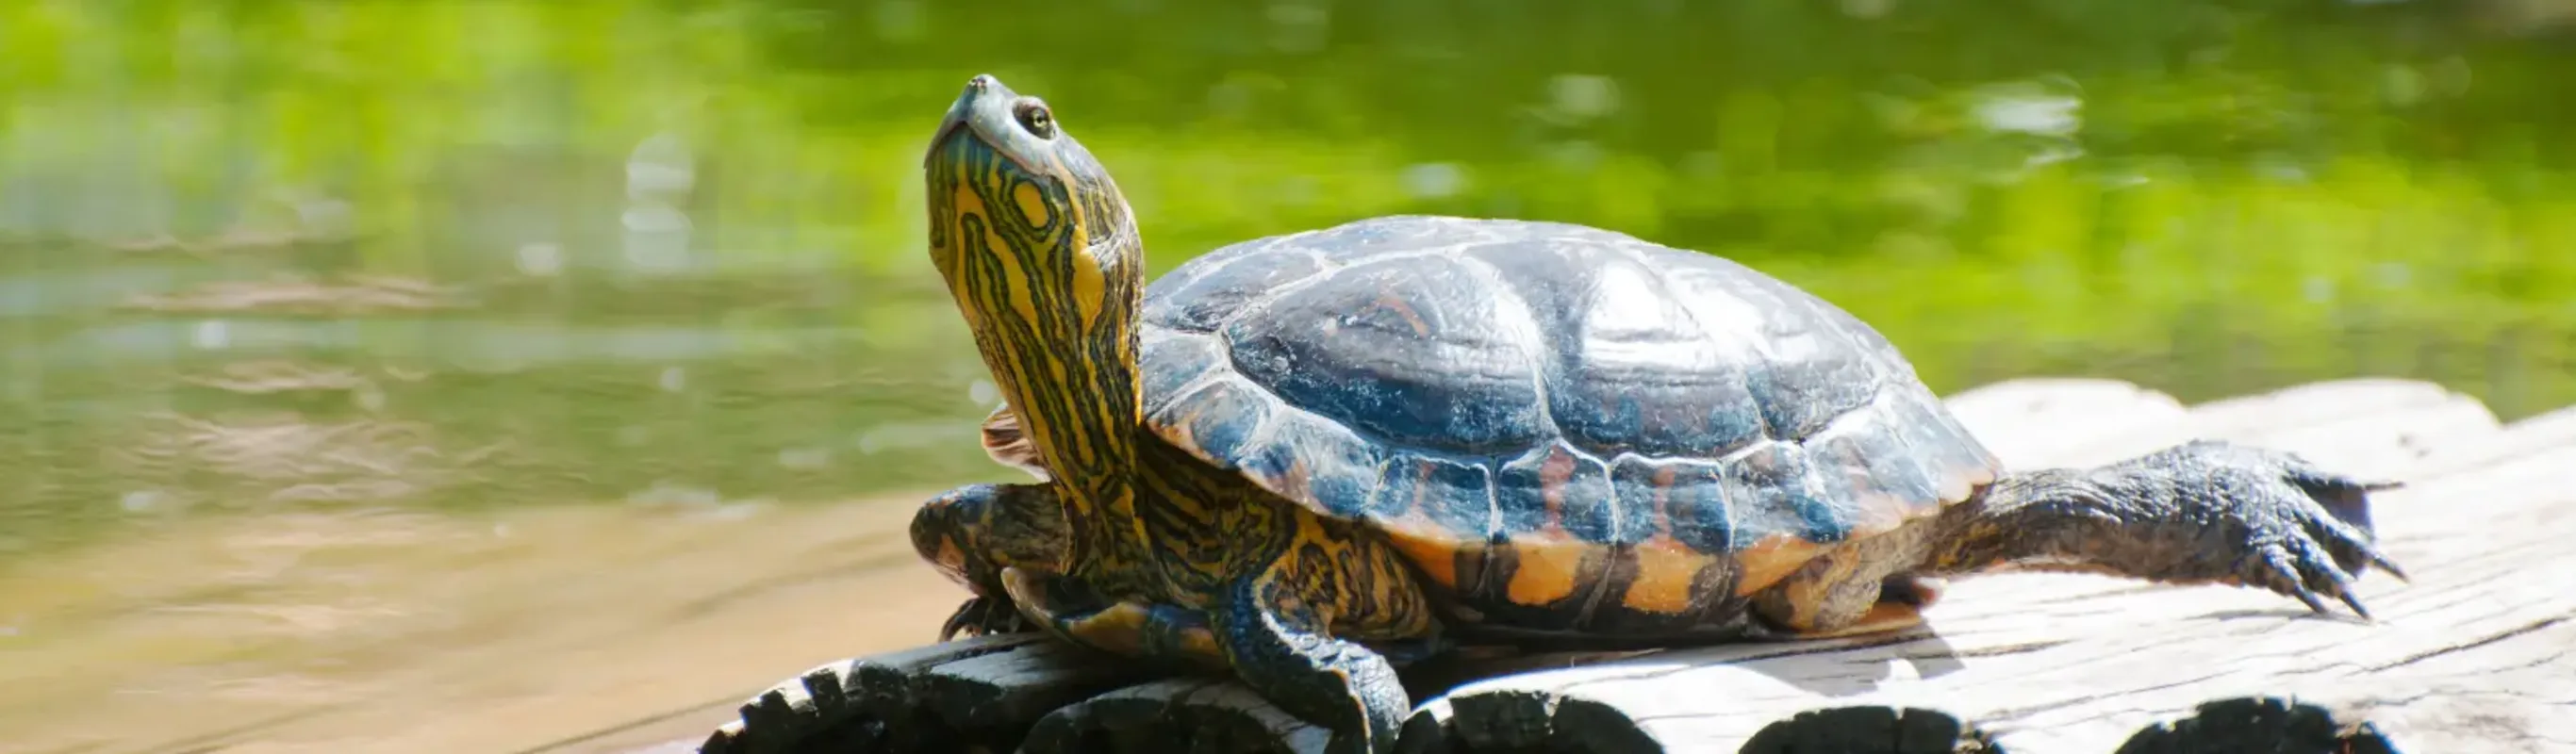 Turtle sunning on logs floating in the water